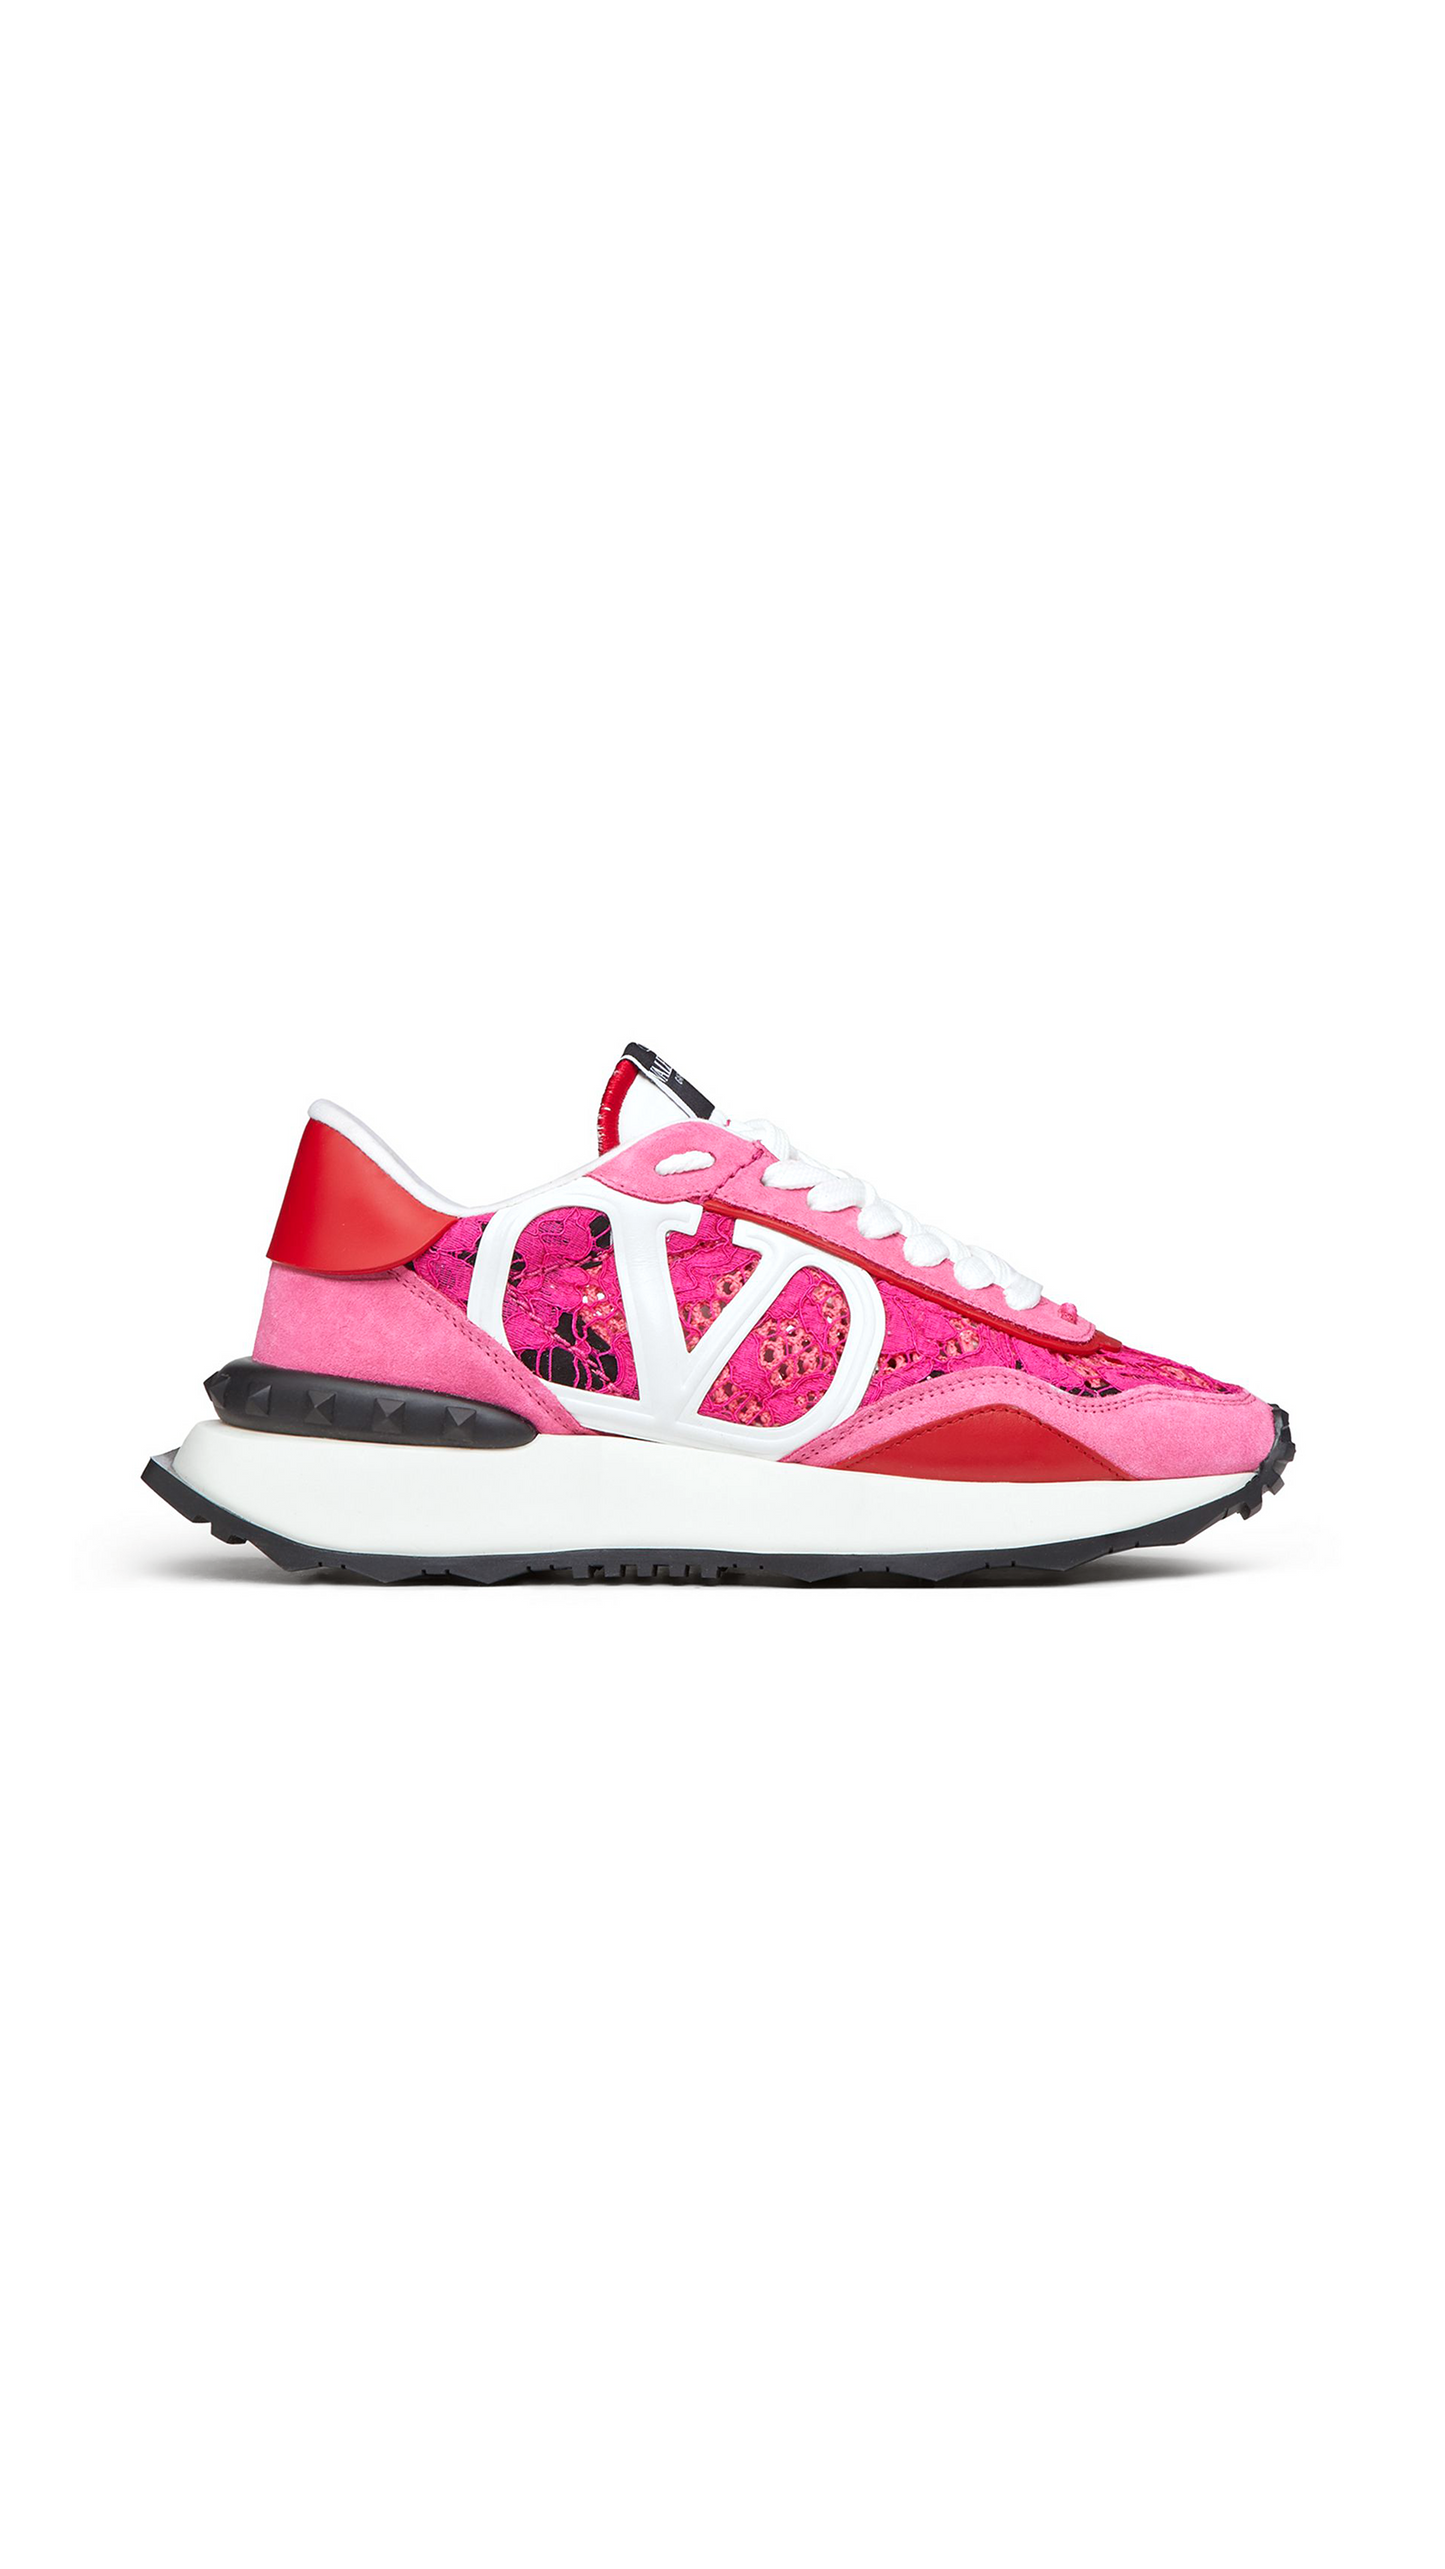 Lacerunner Lace and Mesh Sneakers - Pink